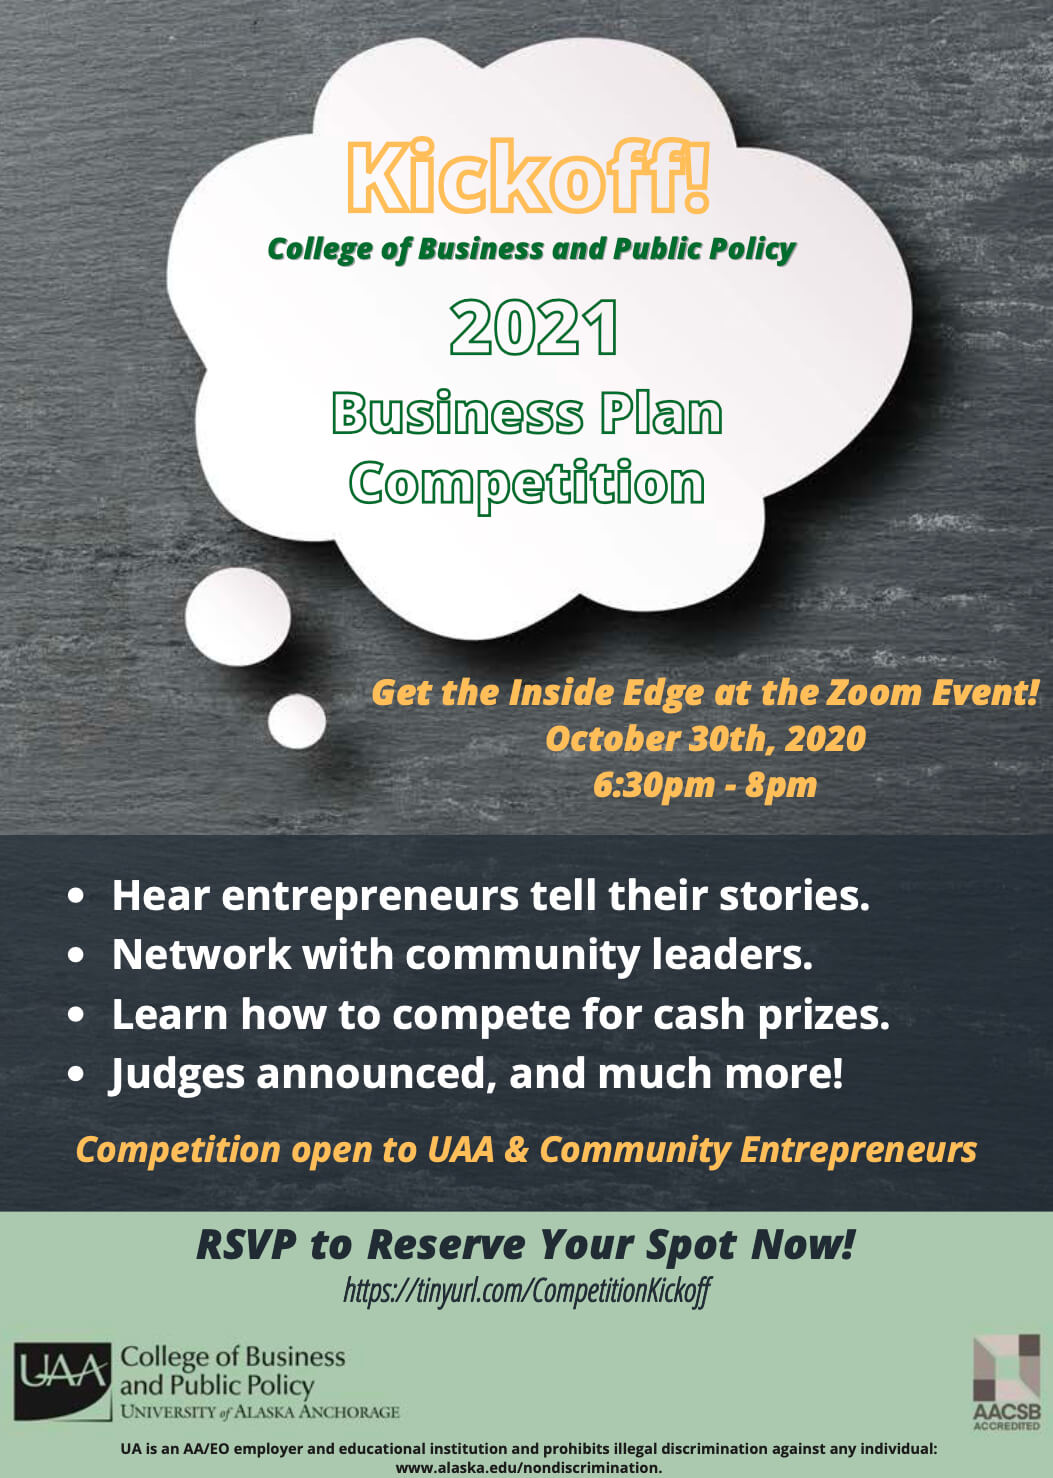 2021 Business Plan Competition Kick Off Flyer